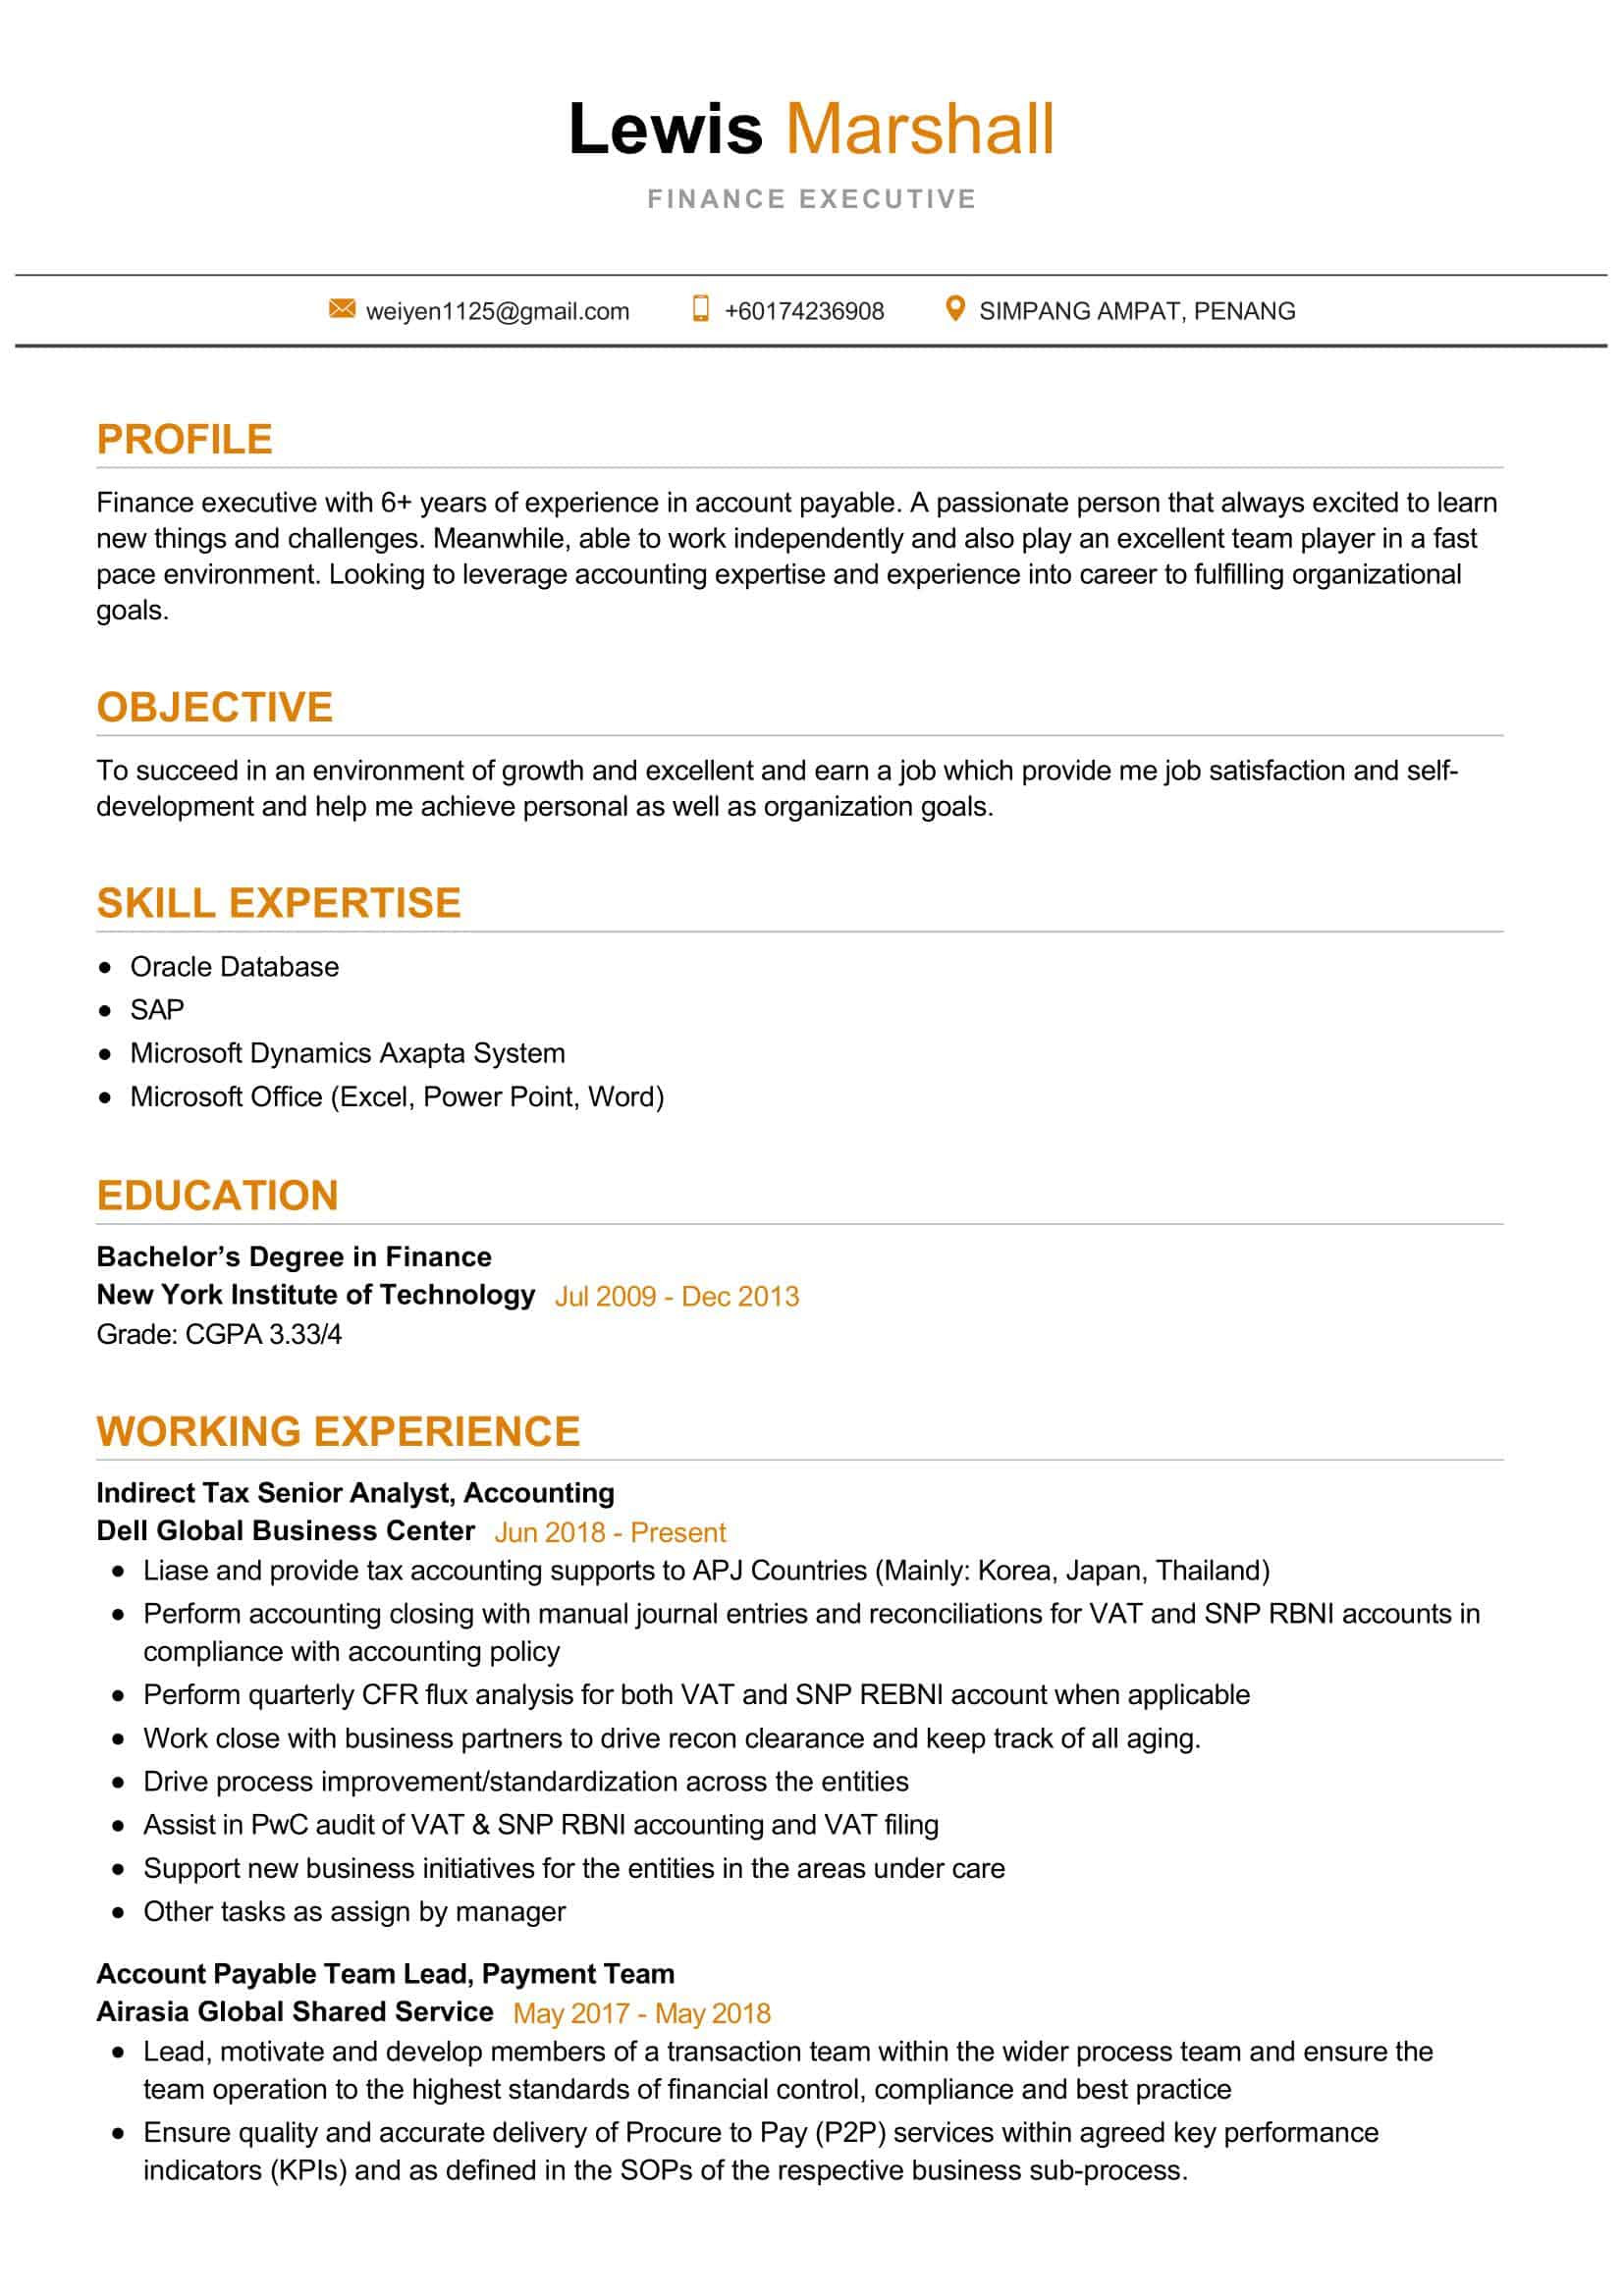 Sample Resume for Experienced Finance Executive Finance Executive Resume Sample Resumekraft